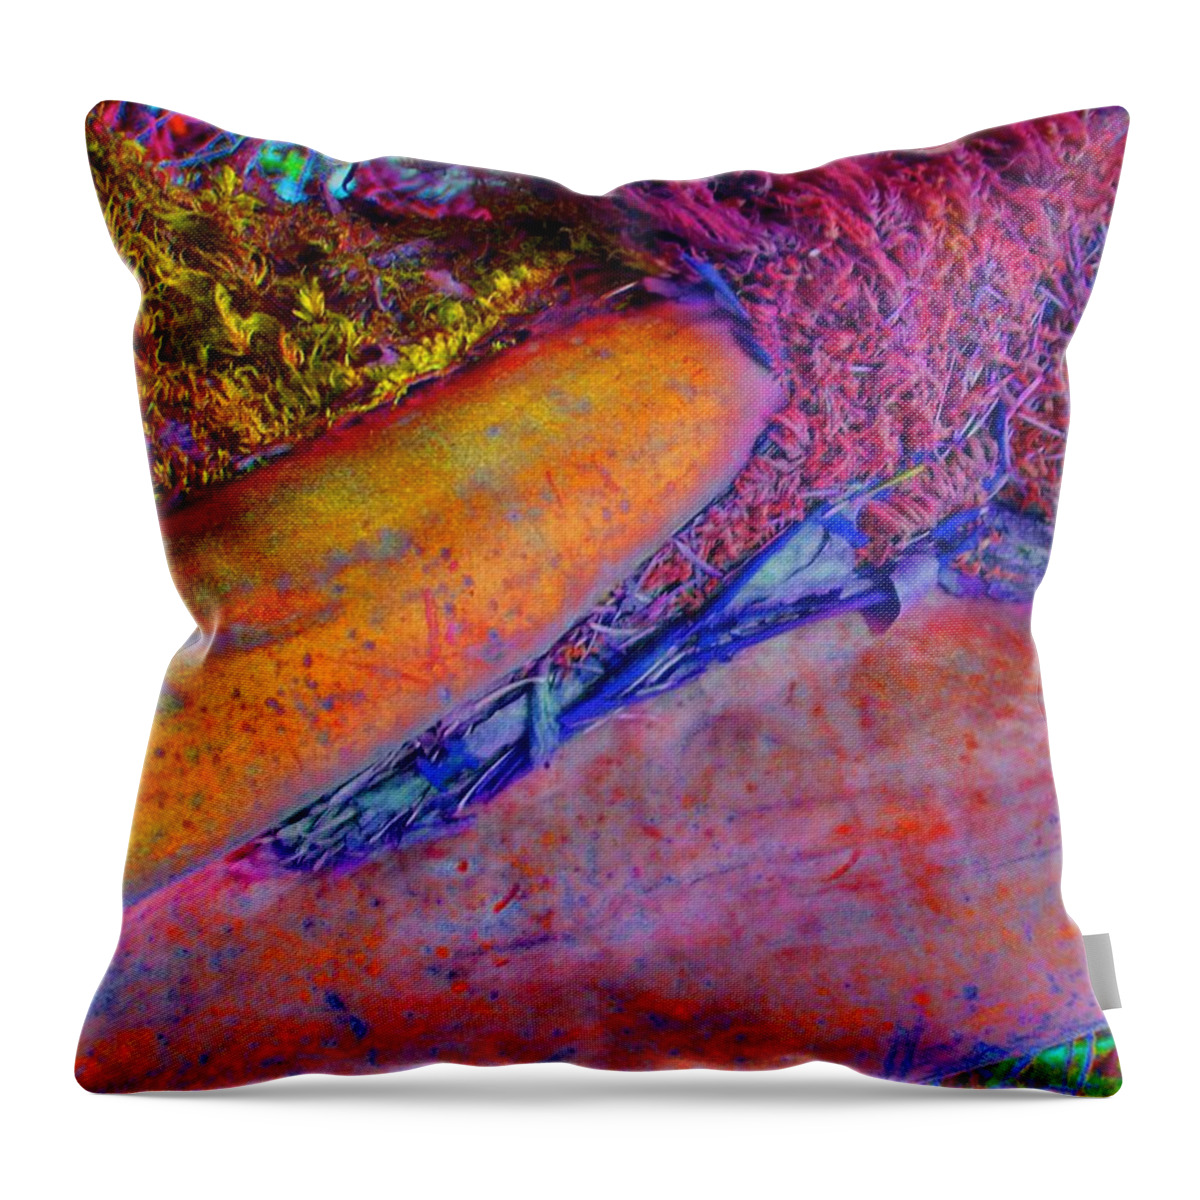 Nature Throw Pillow featuring the digital art Waking Up by Richard Laeton